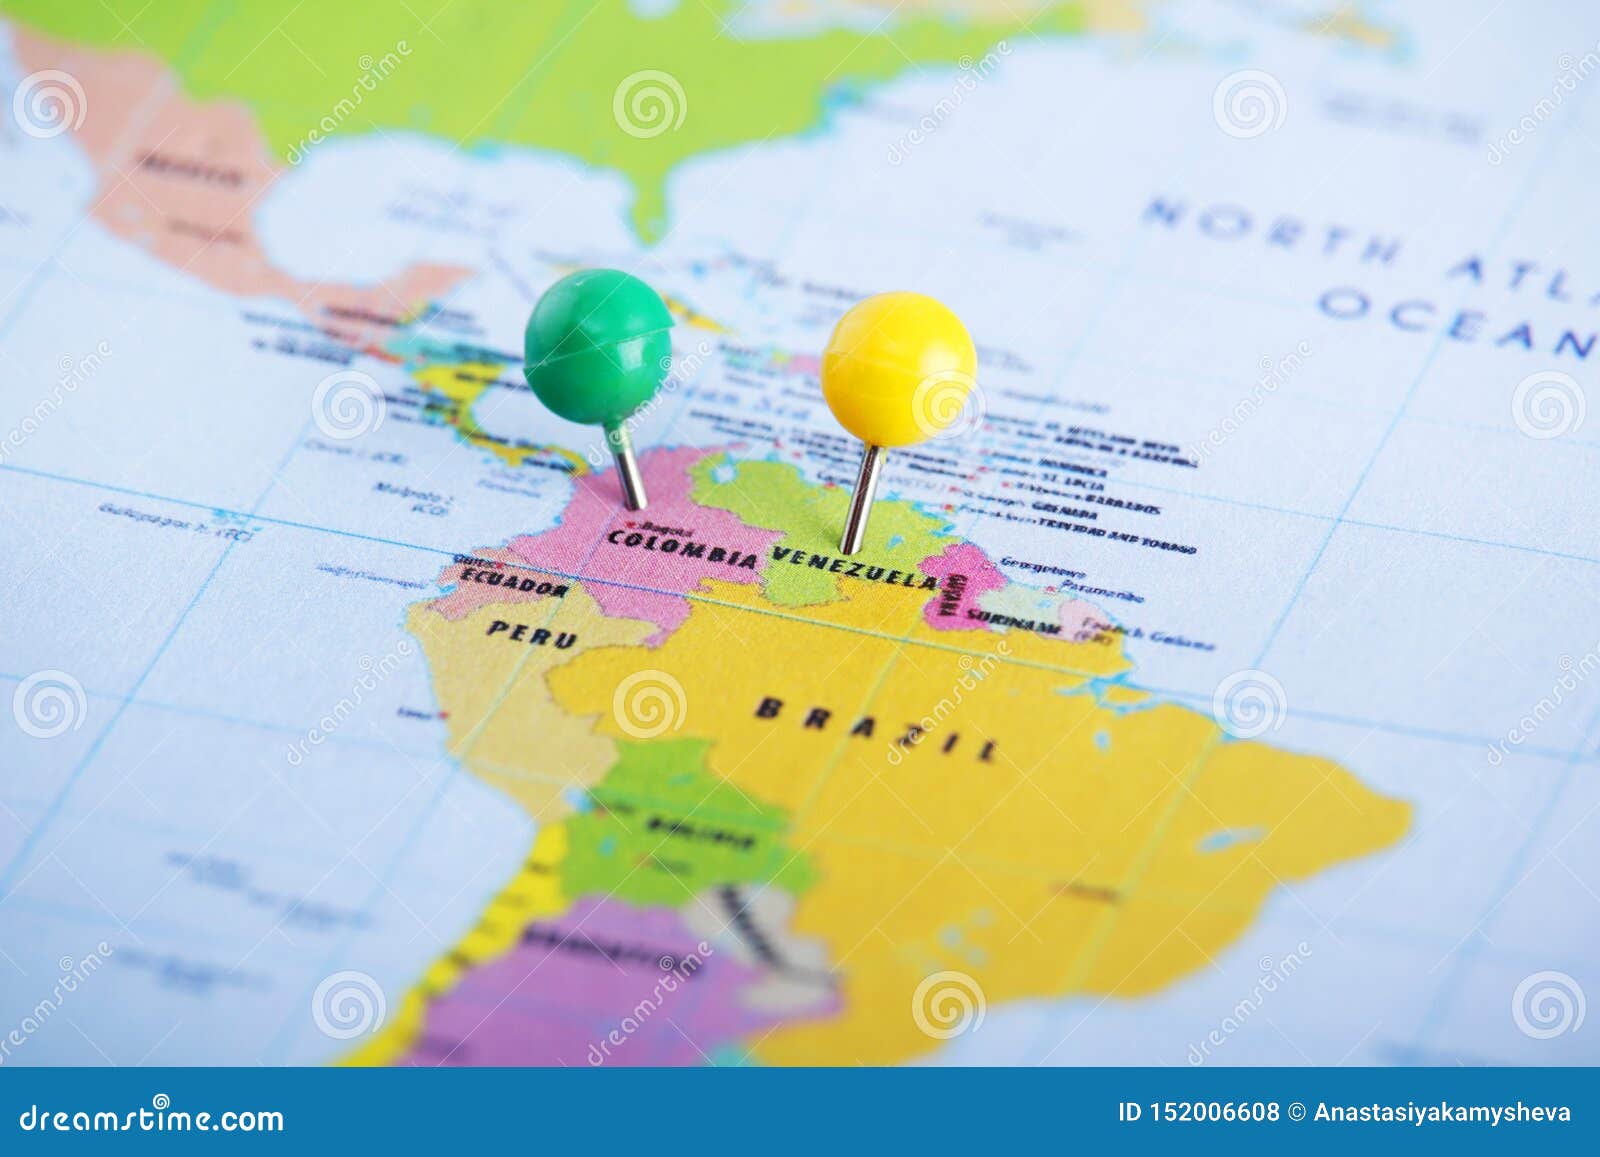 colombia and venezuela pinned at the map